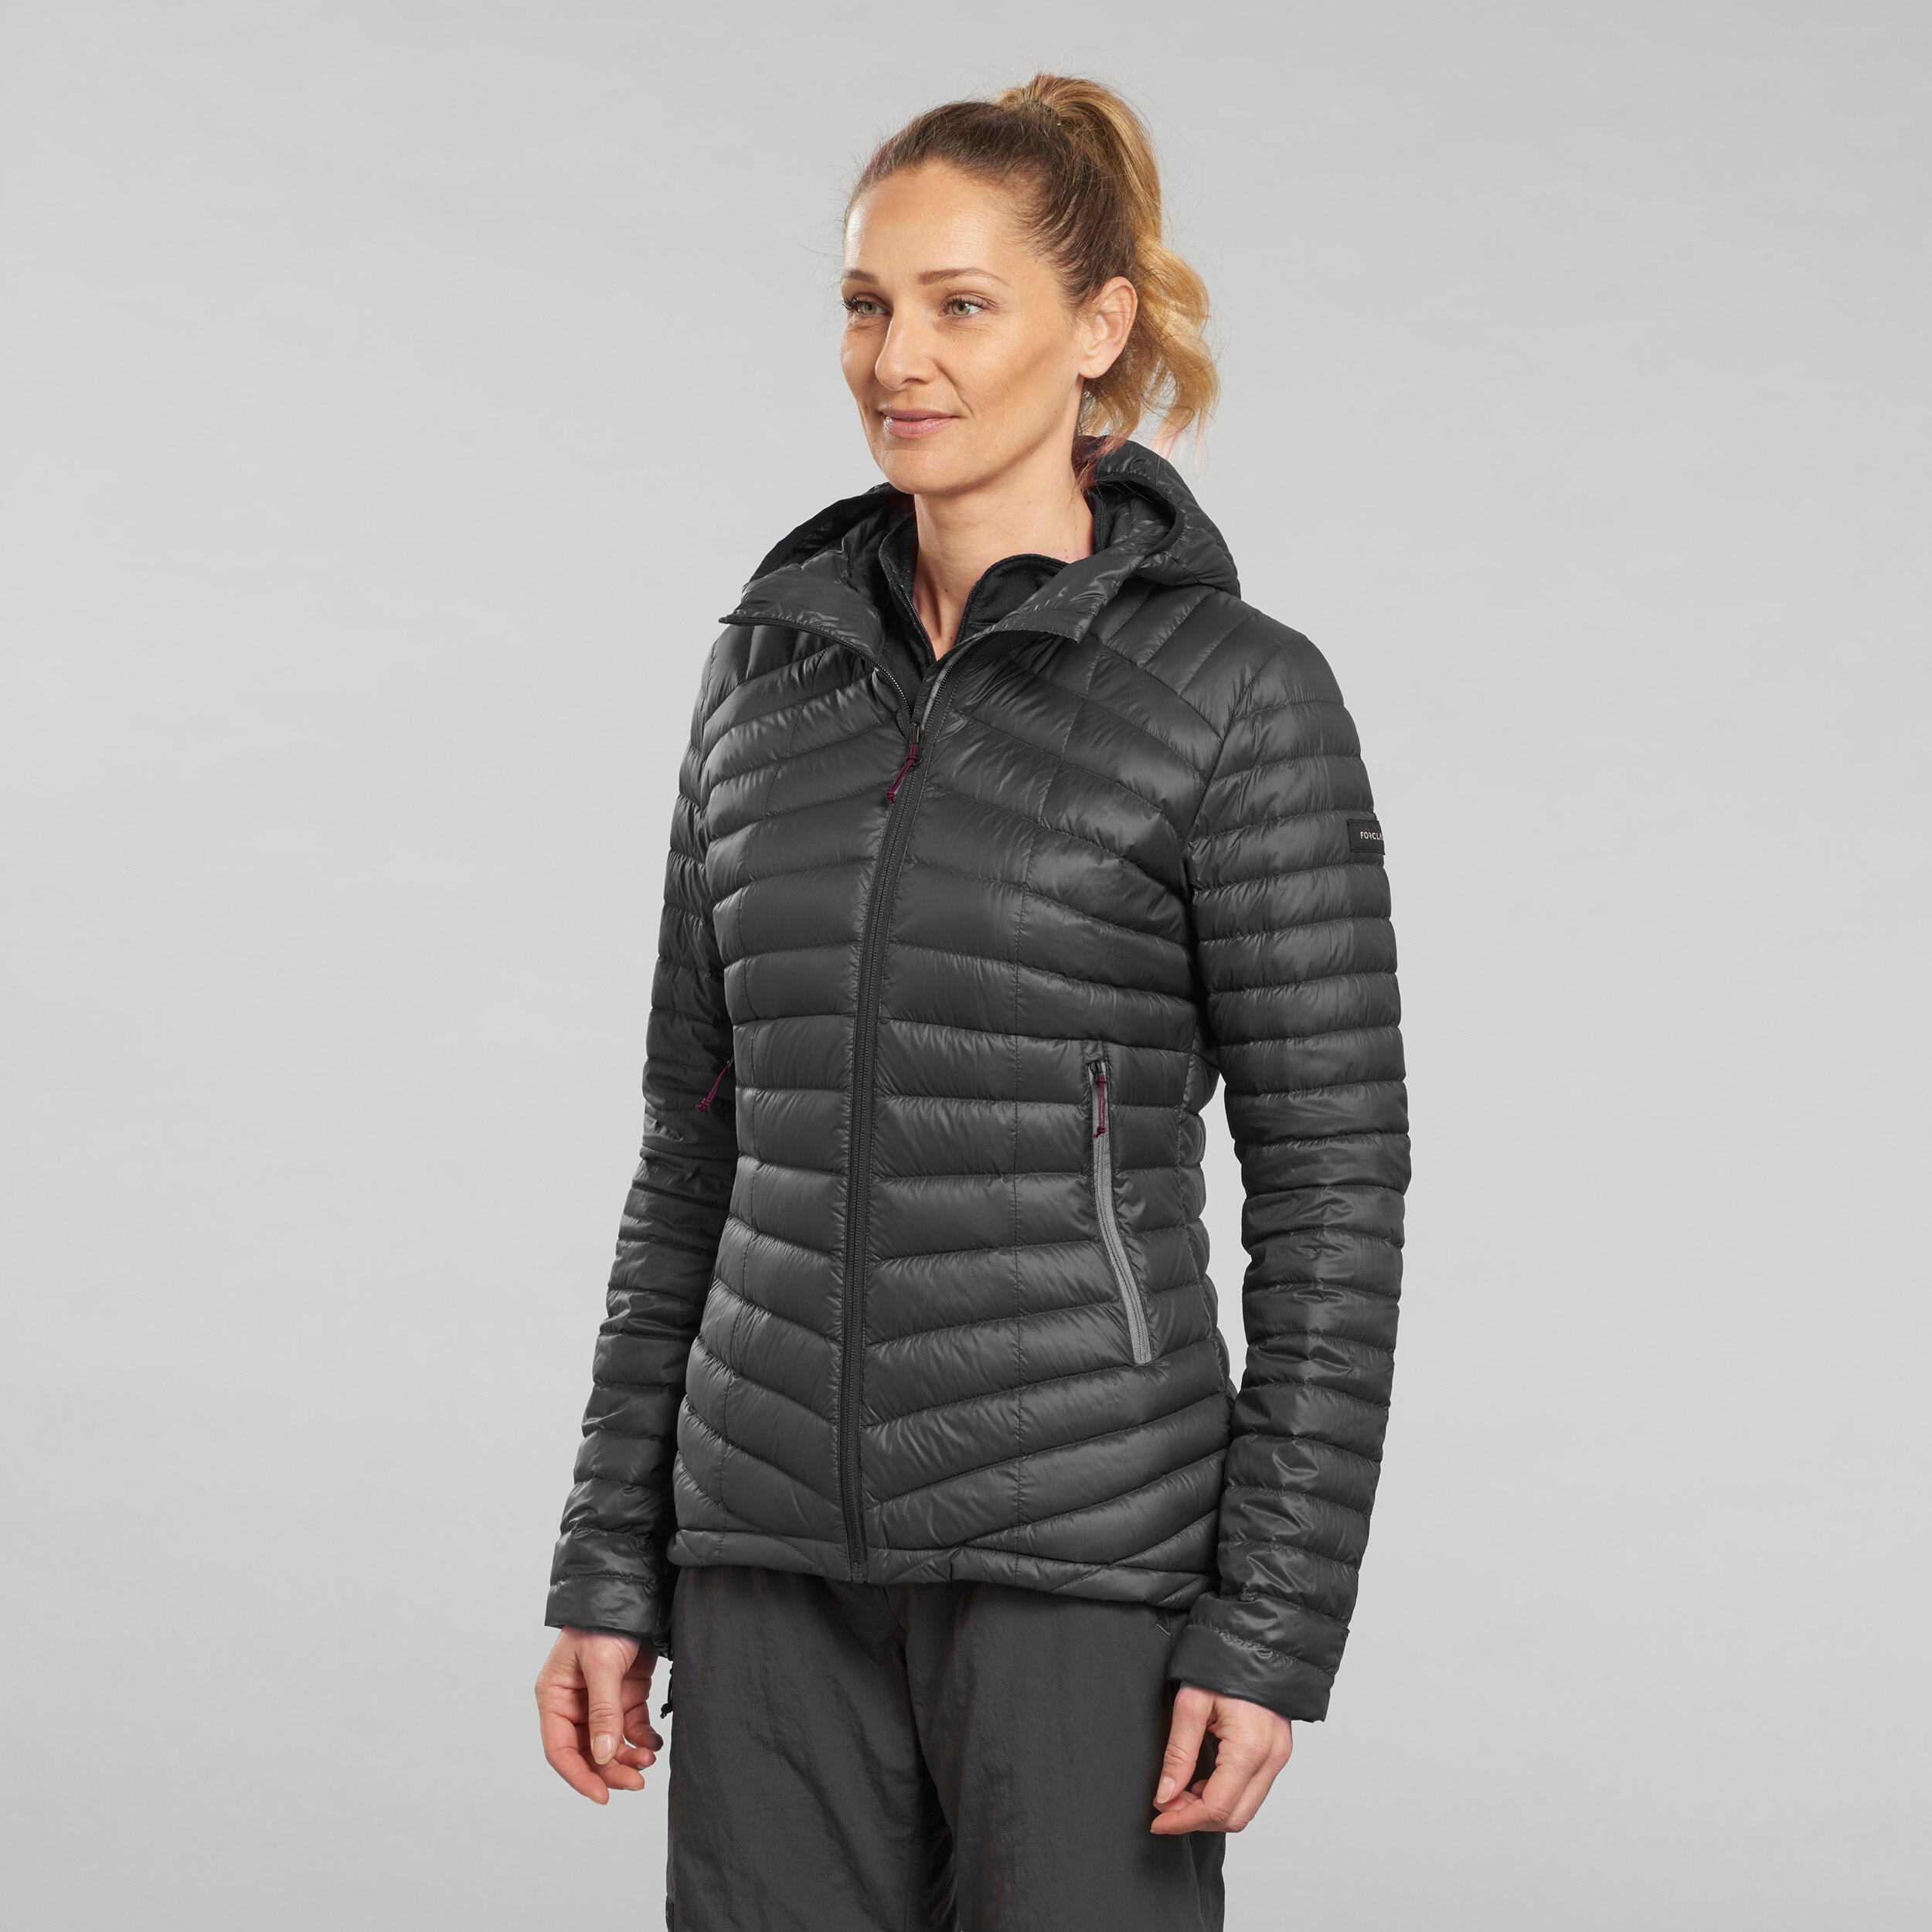 Unlock Wilderness' choice in the Decathlon Vs Patagonia comparison, the MT100 Hooded Down Jacket by Decathlon